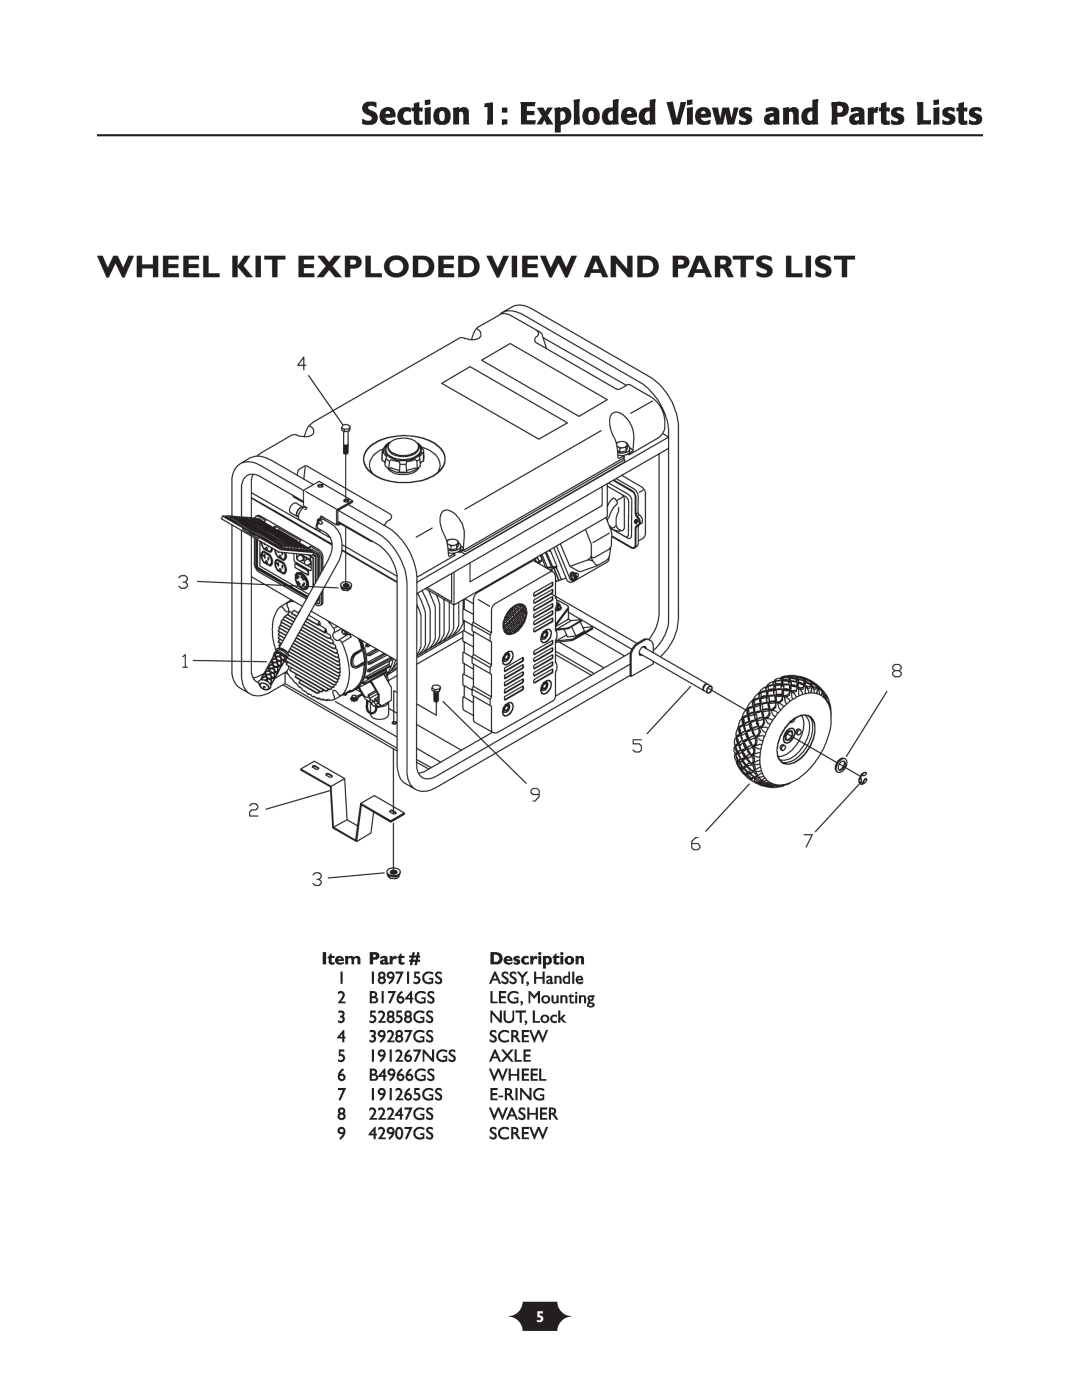 Troy-Bilt 1924 manual Wheel Kit Exploded View And Parts List, Exploded Views and Parts Lists, Description 